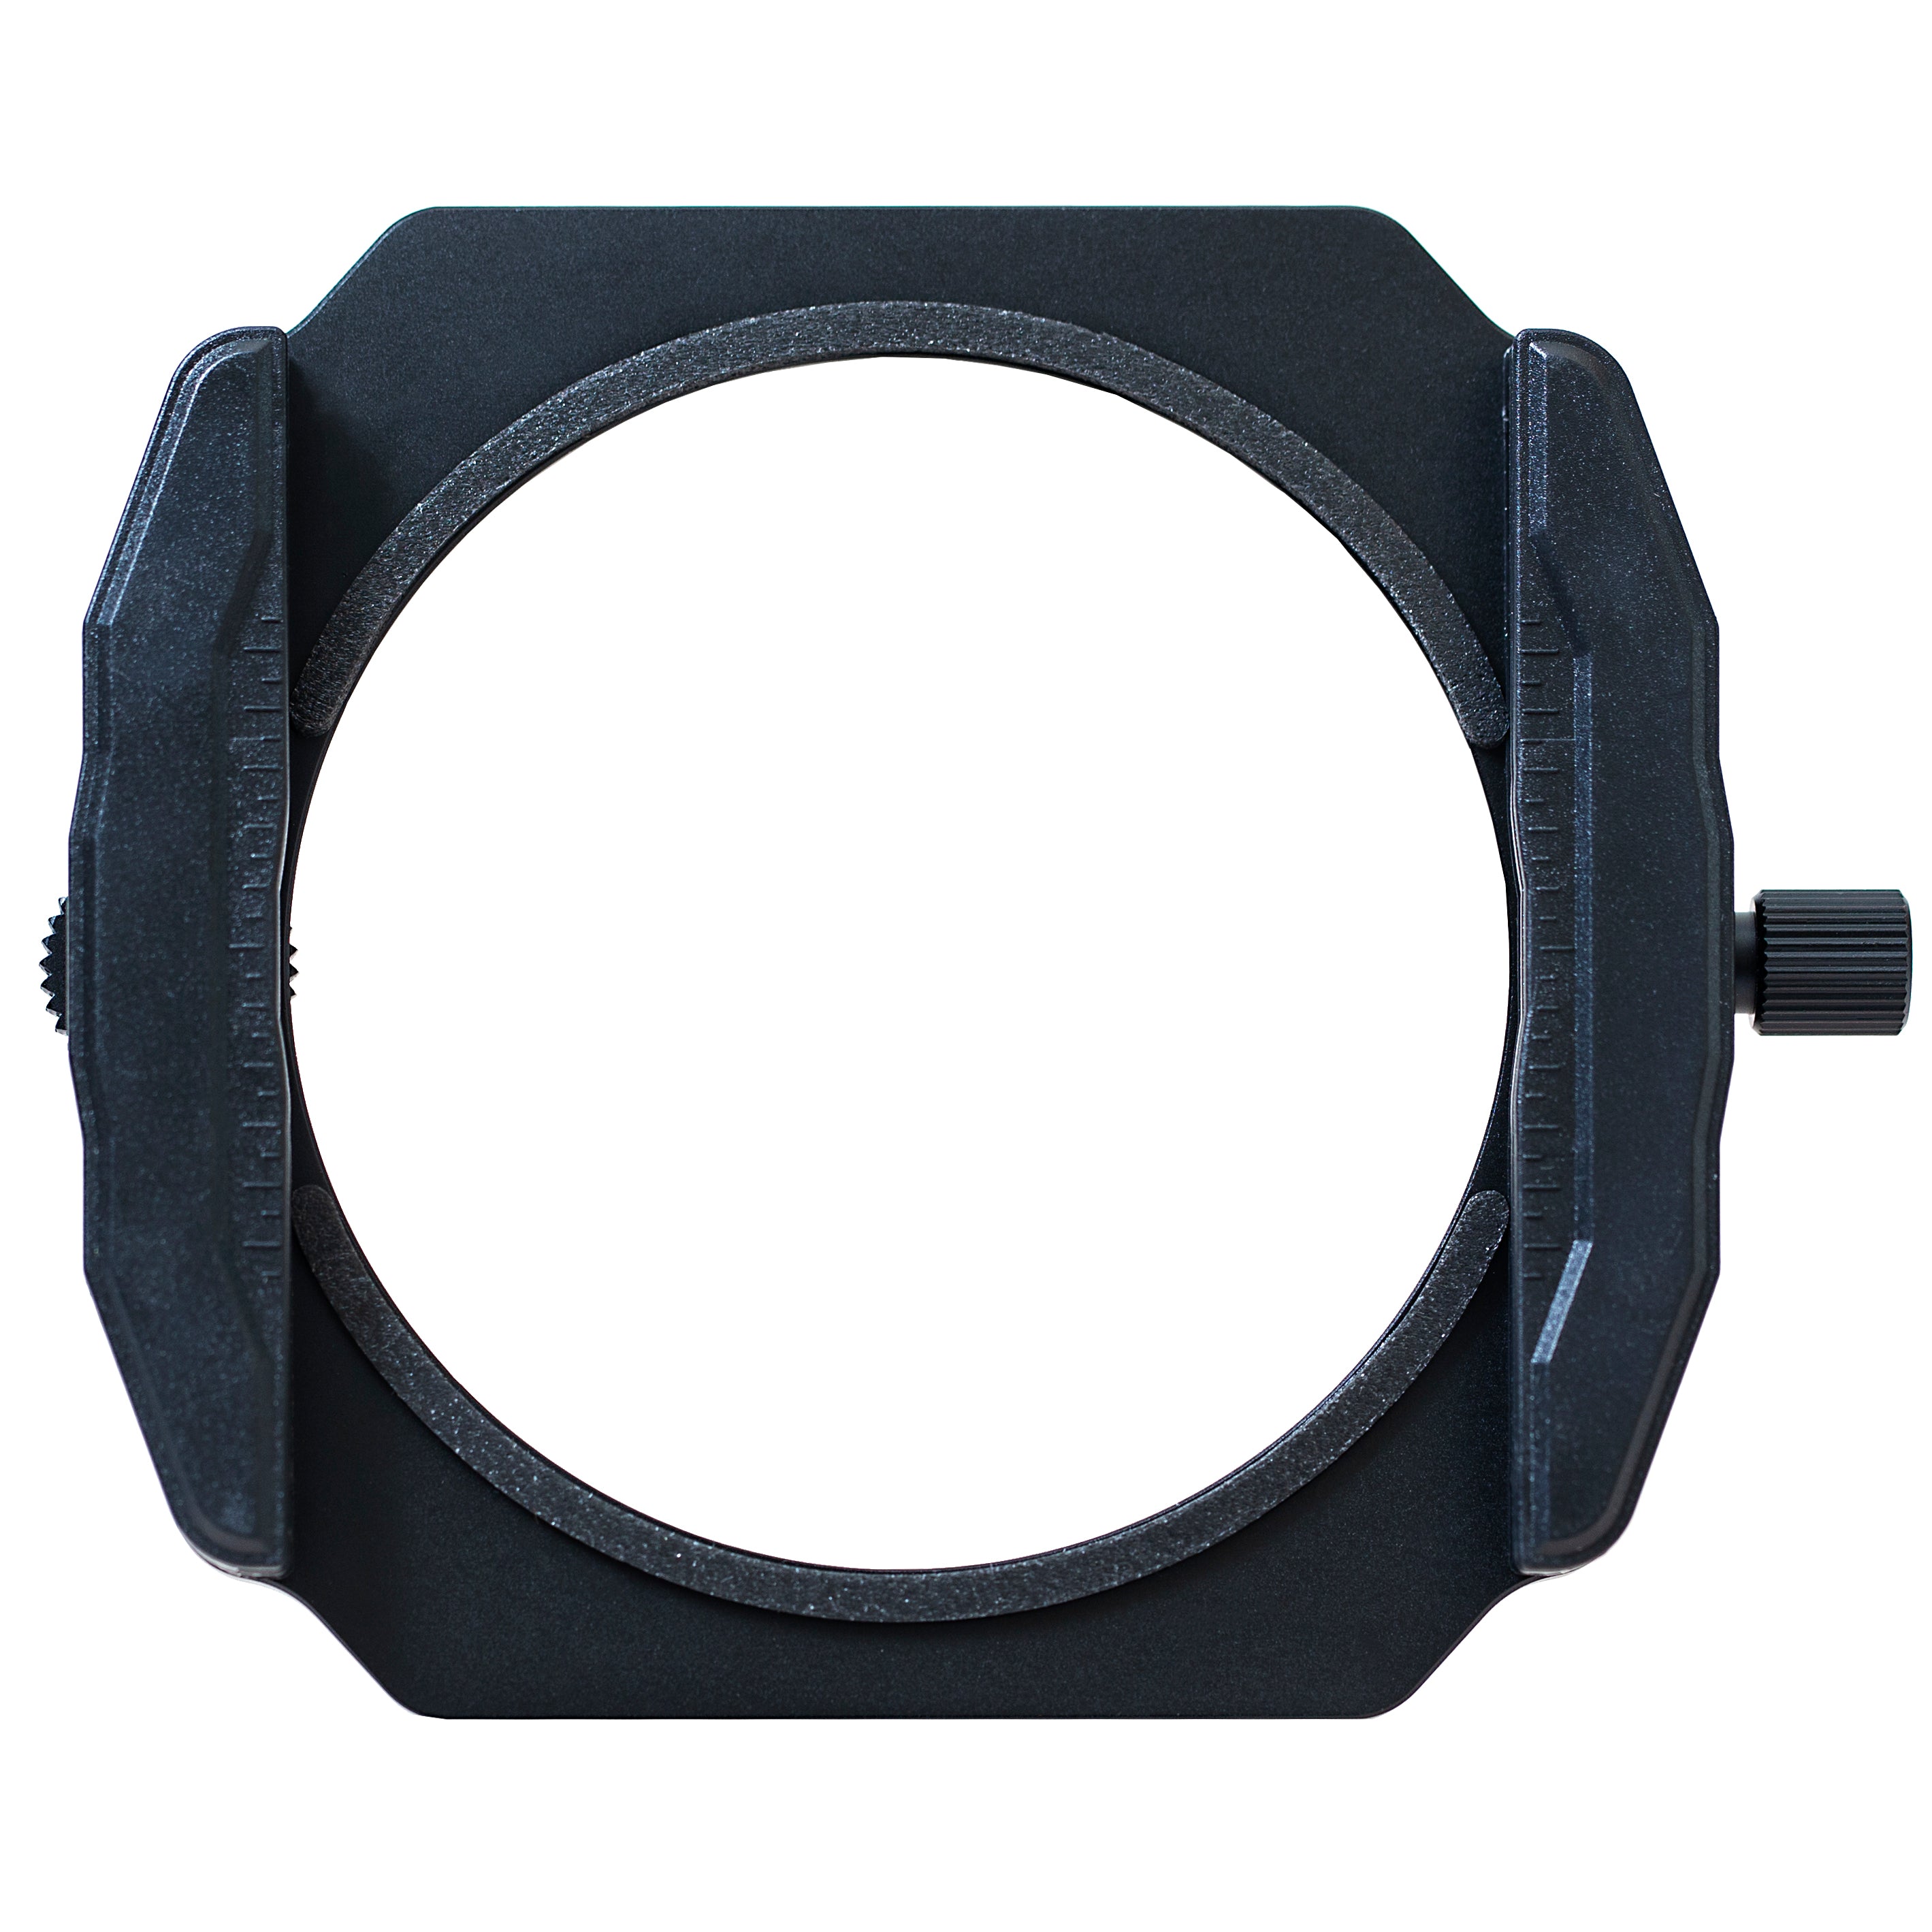 Firecrest 85mm Holder with 77mm Adapter